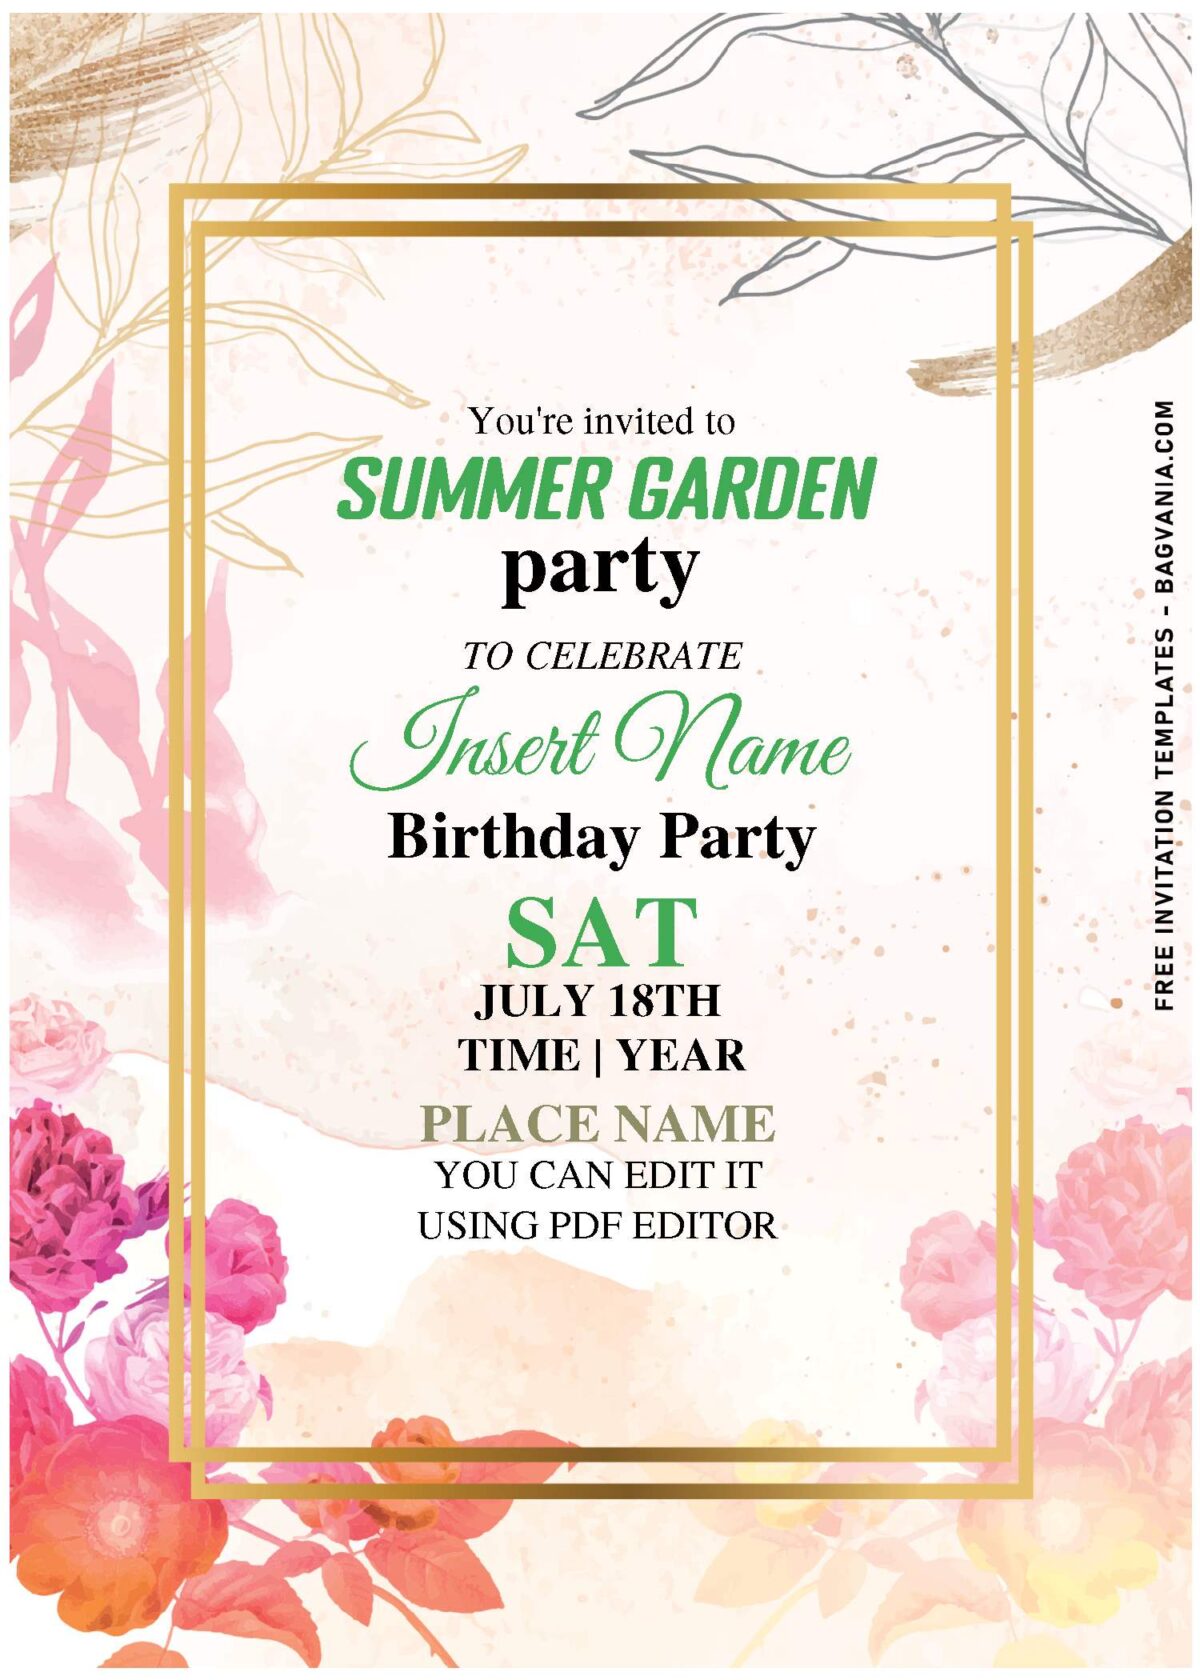 (Free Editable PDF) Vintage Gold And Watercolor Spring Flower Birthday Invitation Templates with watercolor flowers